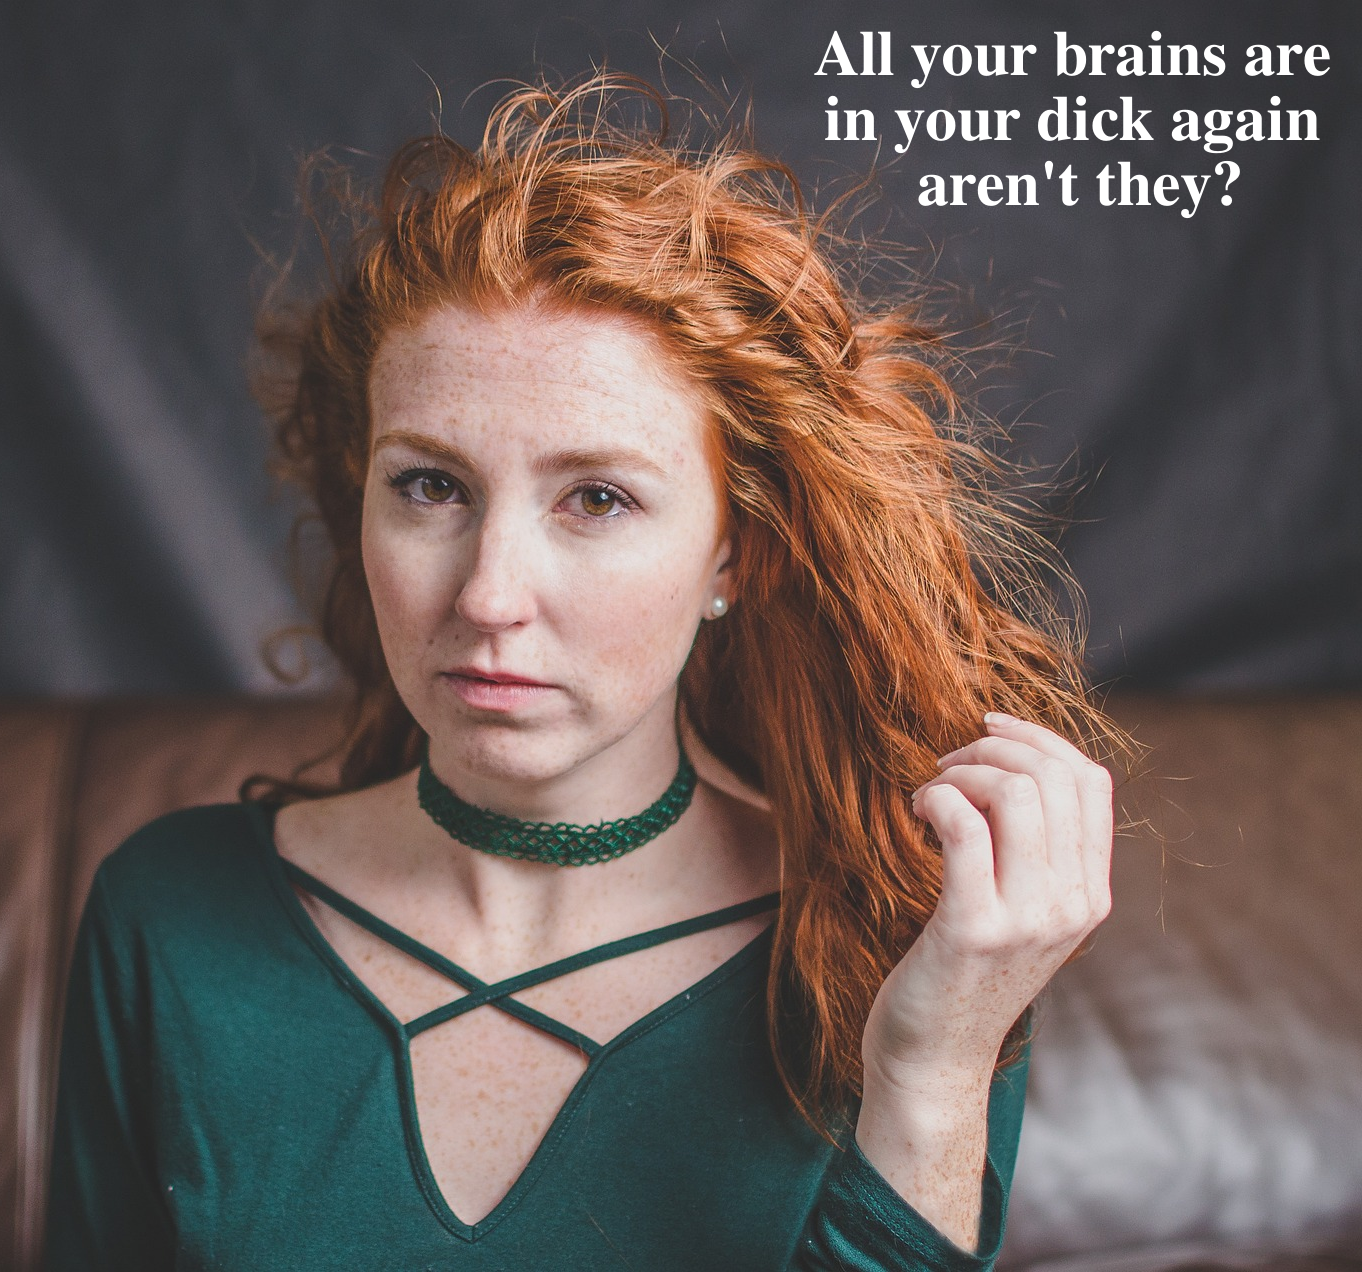 Photograph of a redheaded woman representing Moira from Meadowsweet. Text: All you brains are in your dick again, aren't they?